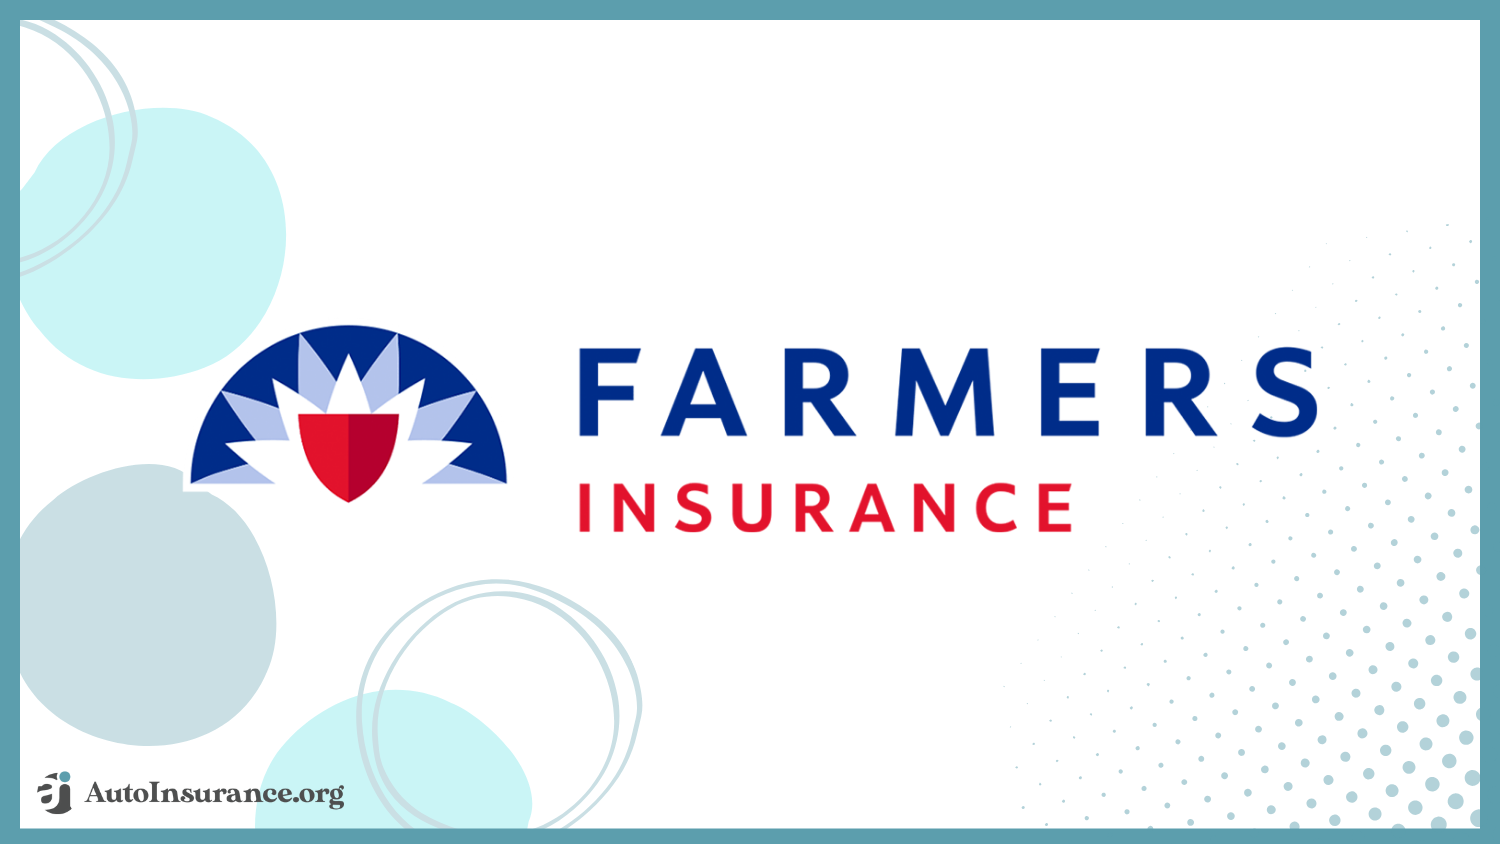 Farmers: Best Auto Insurance for Families